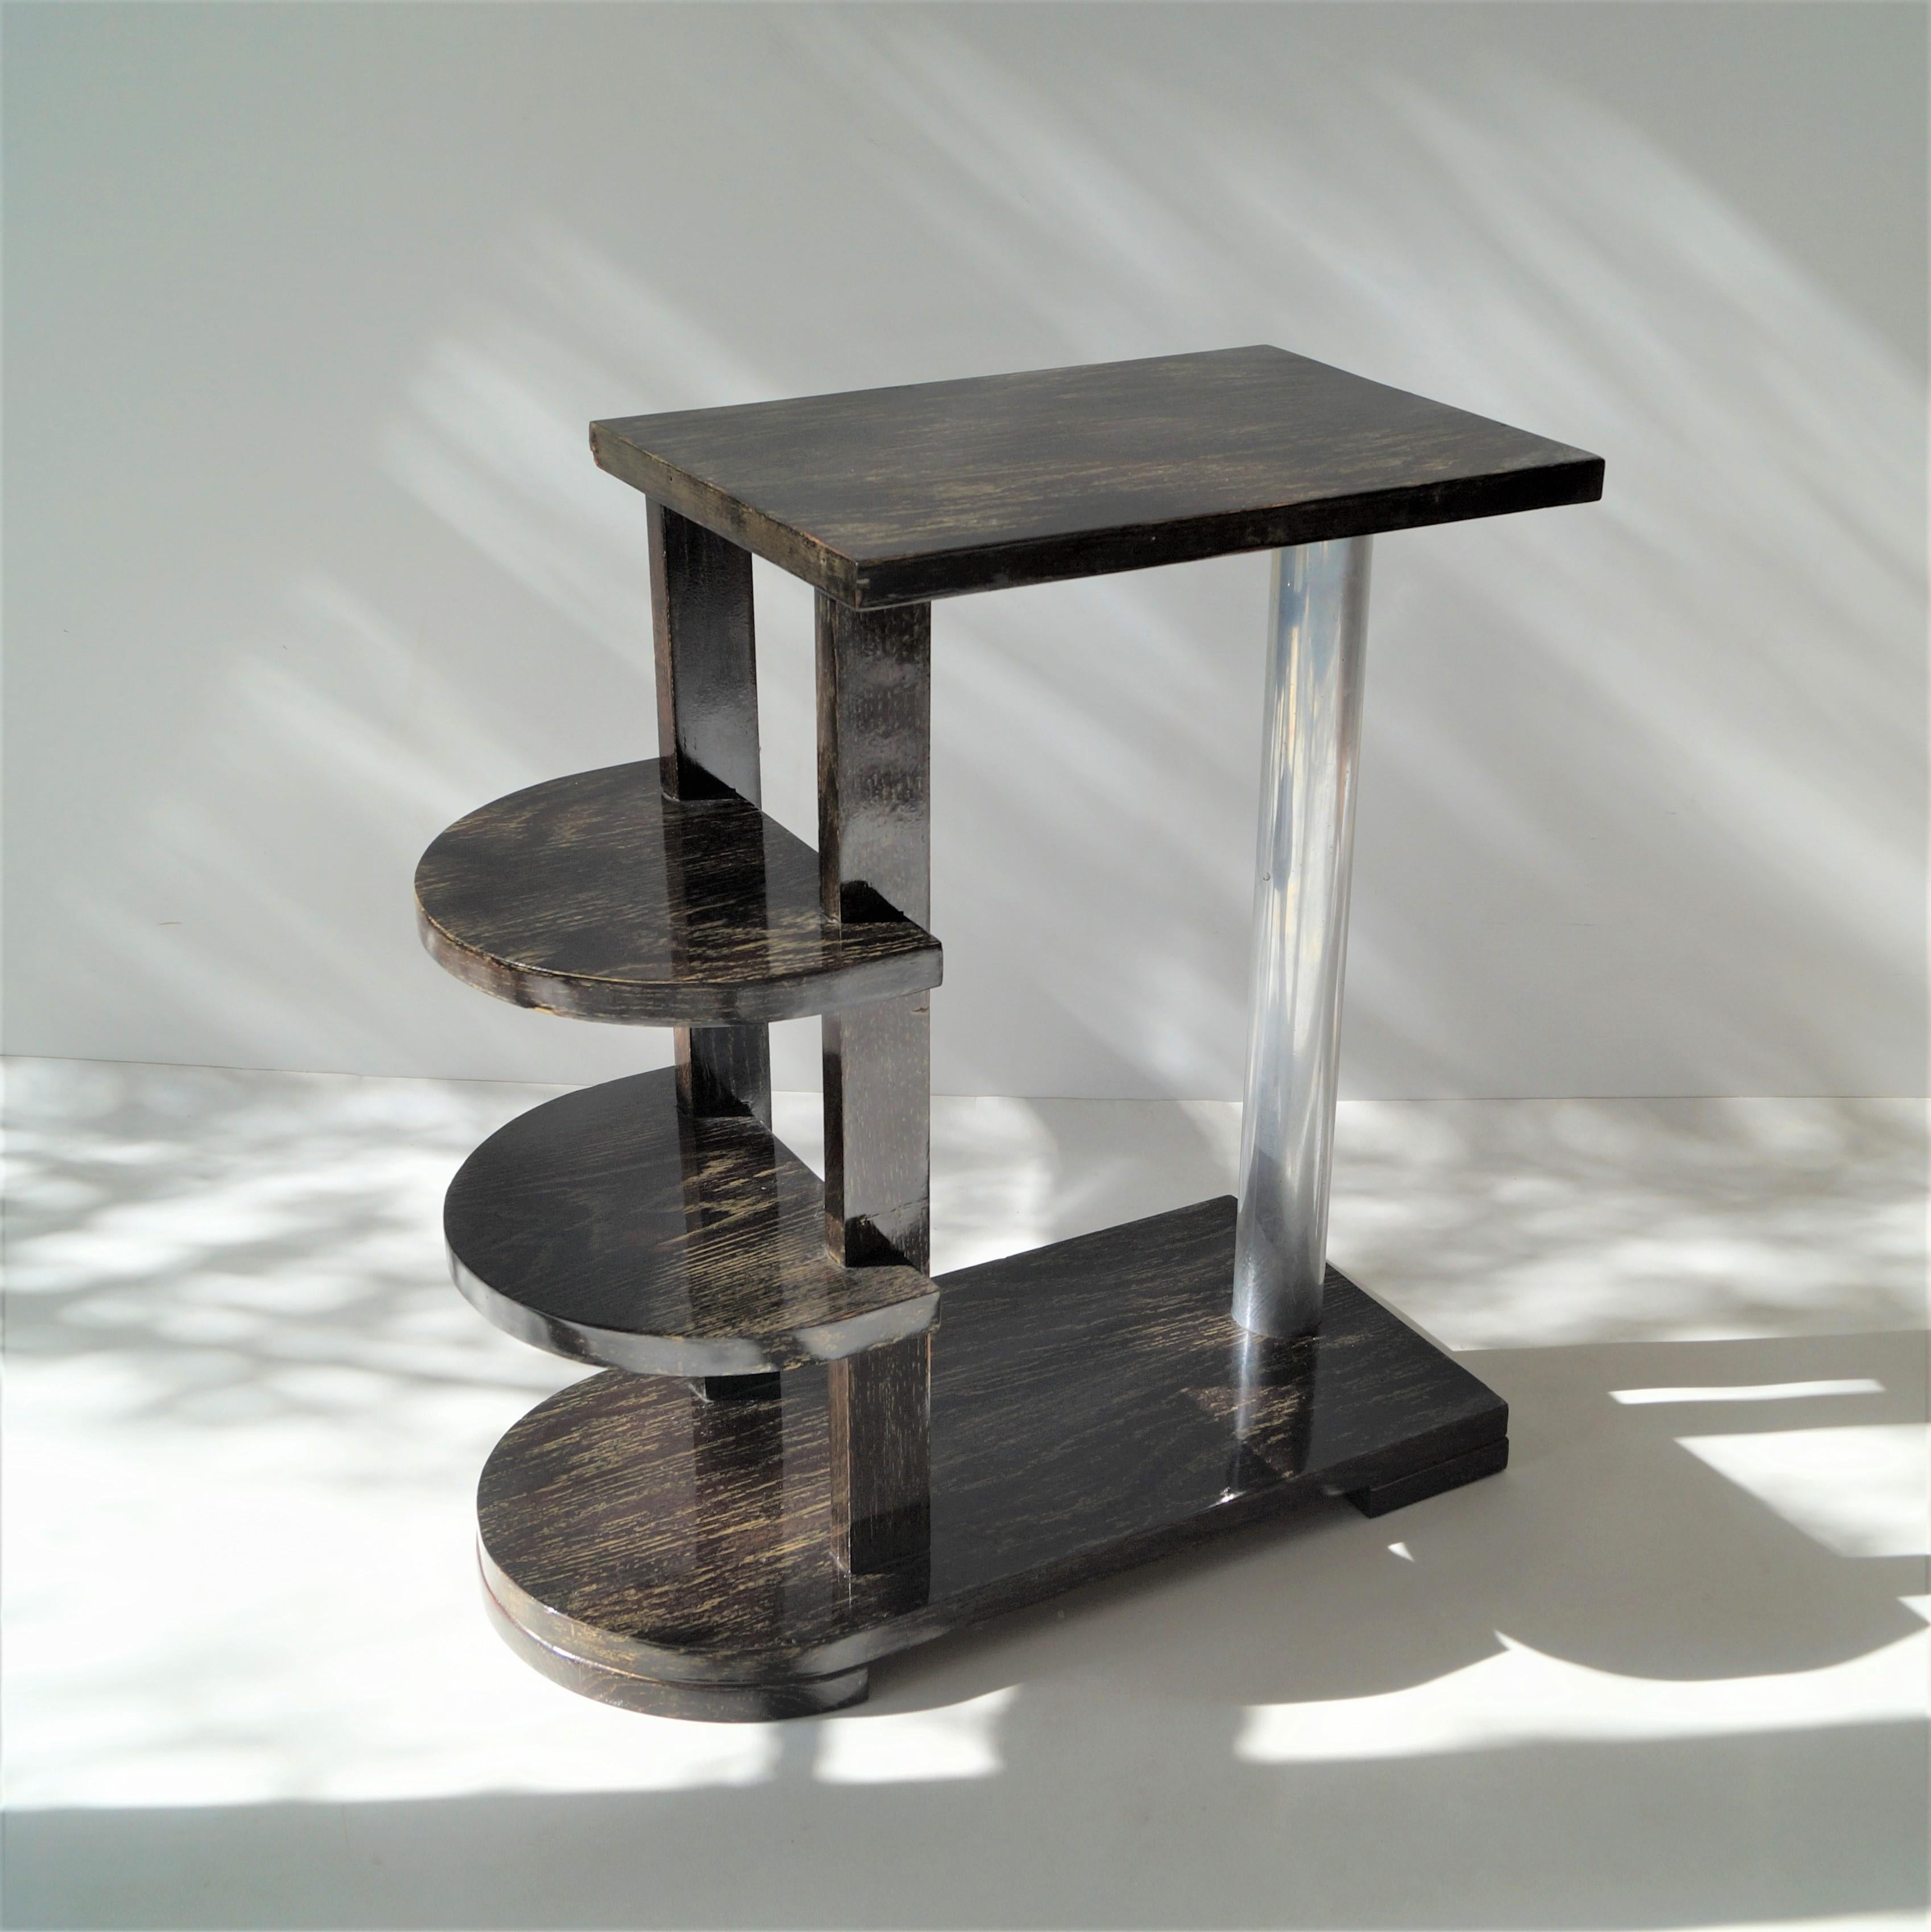 A rare 1930s modernist sidetable or serving table by Michel Dufet, in wenge veneer (bois palmier) with a polished nickel tube support and two half round shelves. A very similar table is documented in the following book: Florence Camard, 